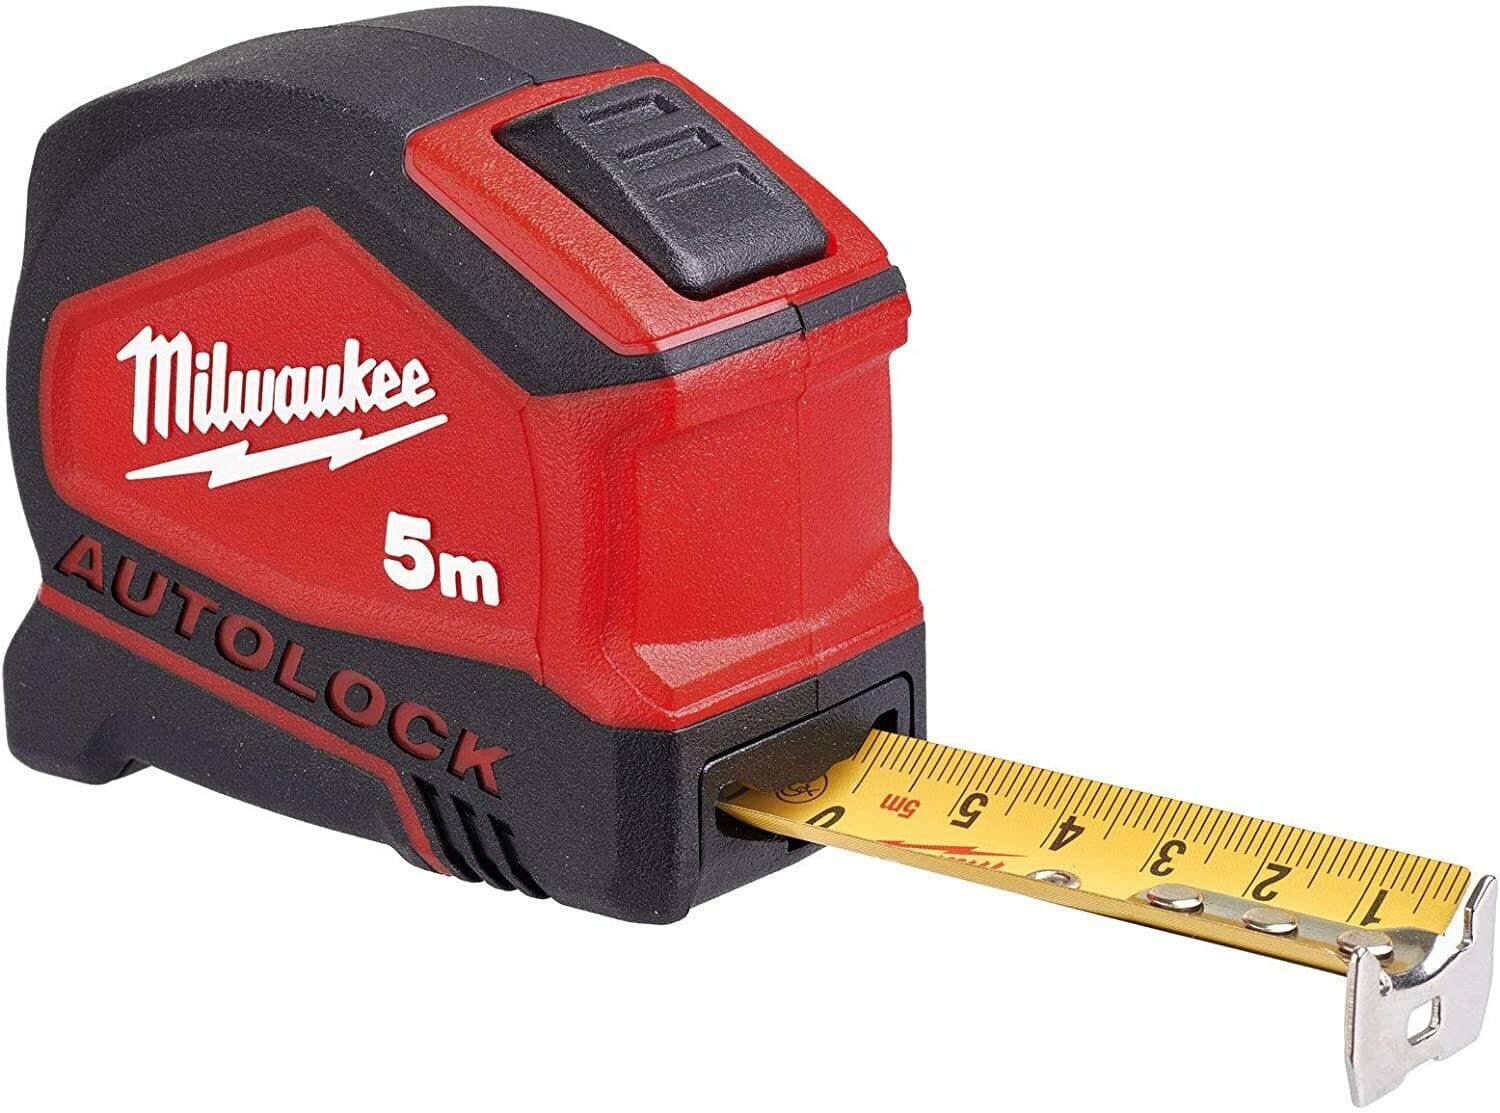 Milwaukee Measuring Tape With Auto Lock 8m/26ft - 4932464666 | Supply Master | Accra, Ghana Tape Measure Buy Tools hardware Building materials